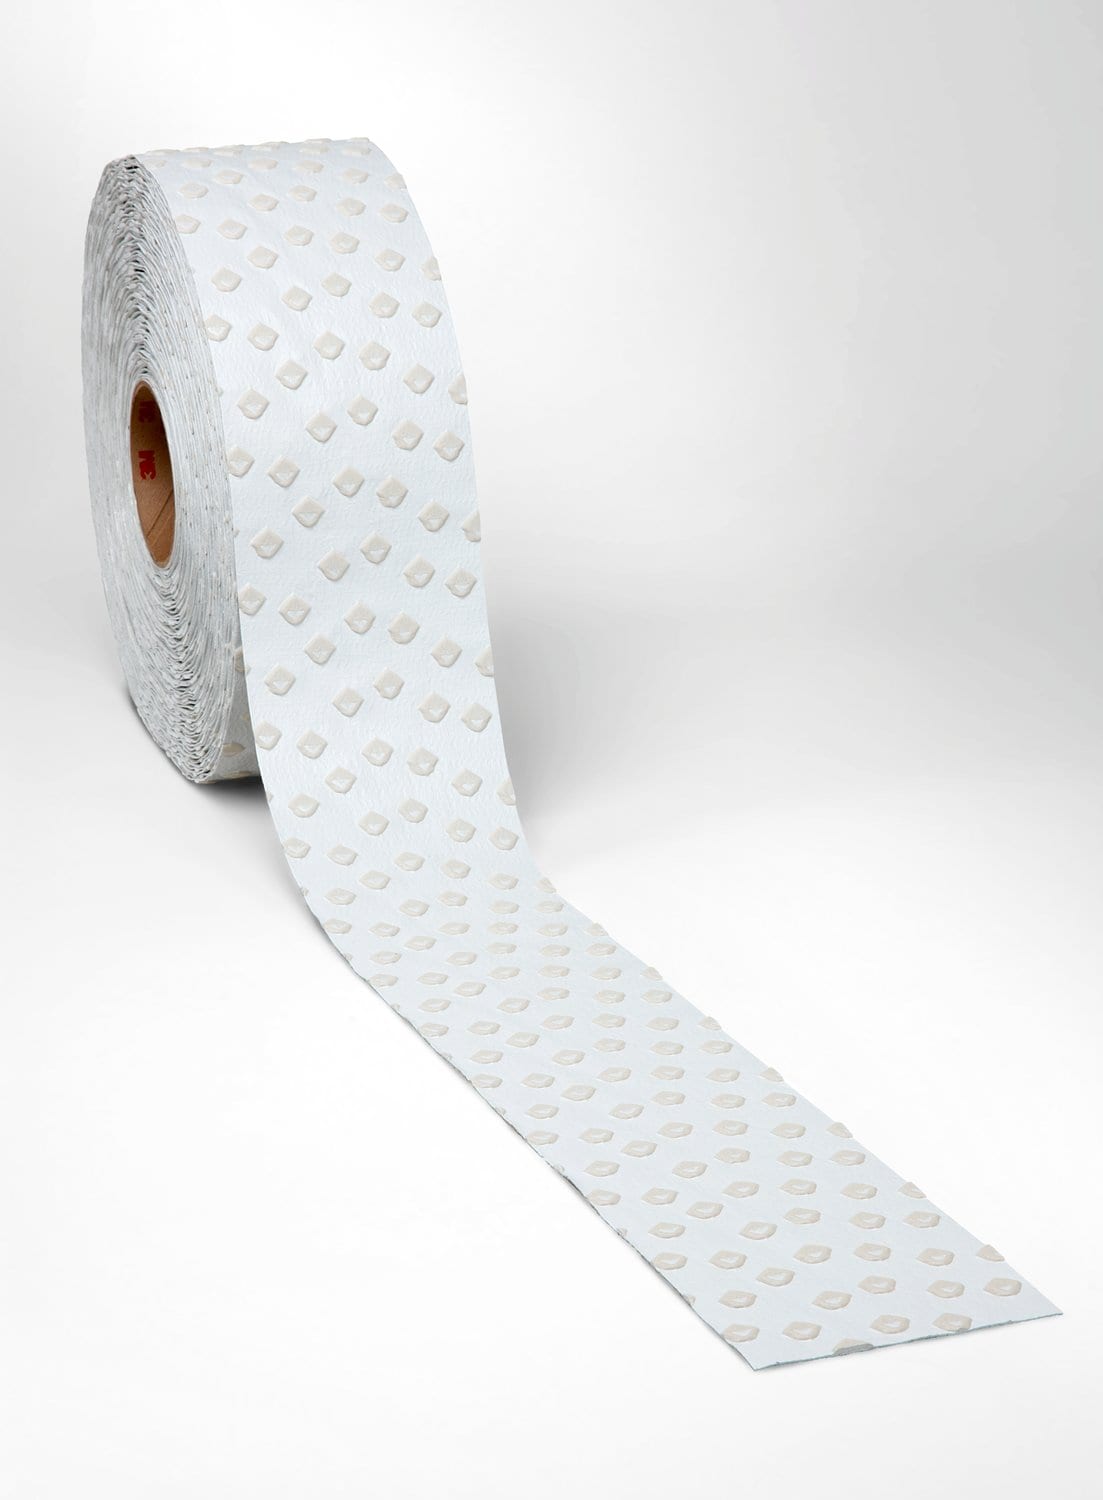 7010389745 - 3M Stamark Removable Pavement Marking Tape A710, White, IL only, 8 in
x 40 yd